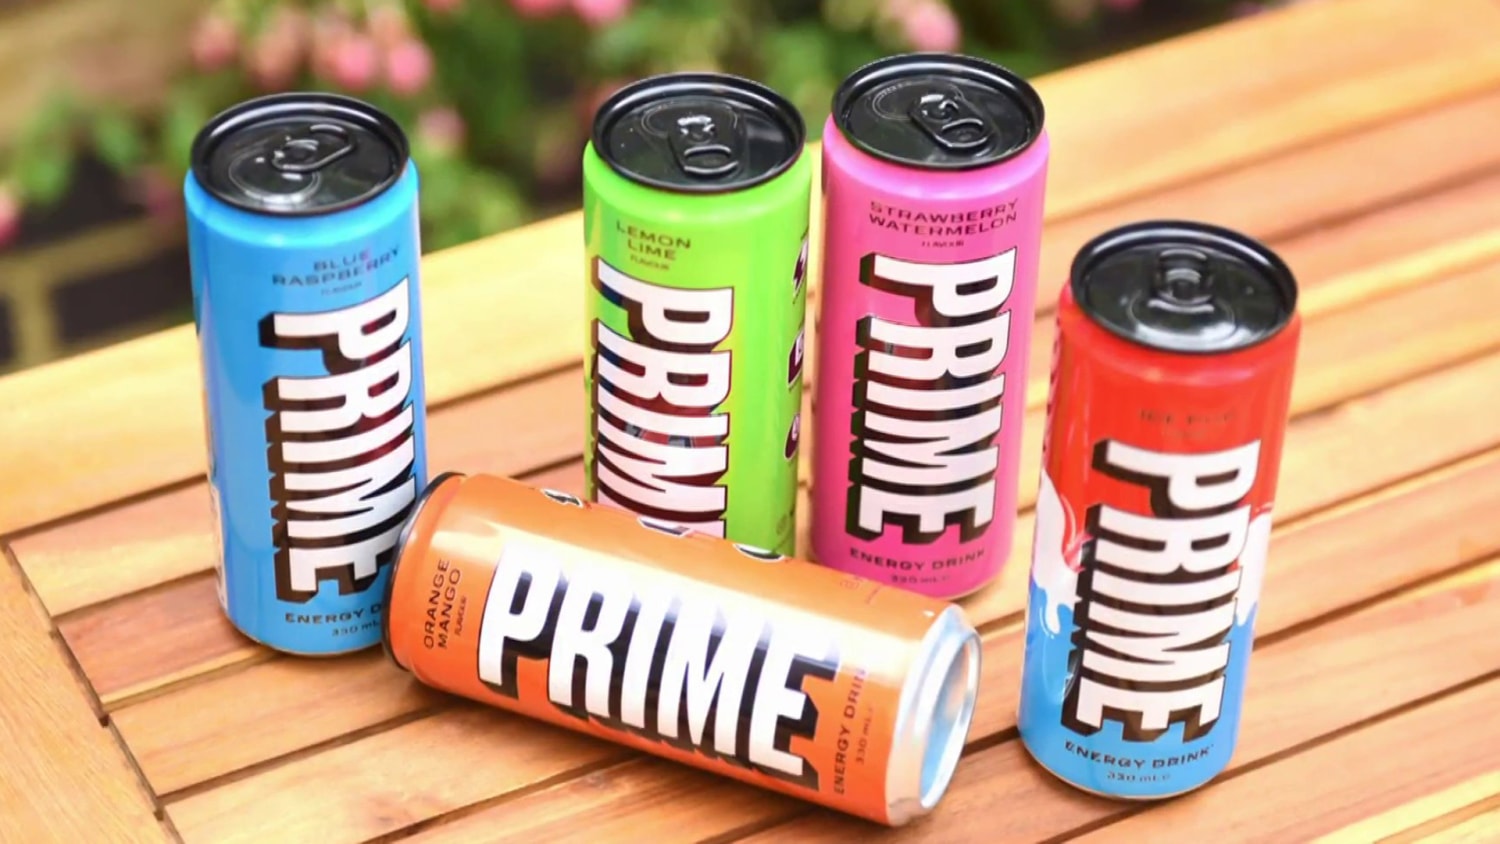 FDA asked to investigate Logan Paul's energy drink, PRIME, which has the  caffeine of 6 Coke cans